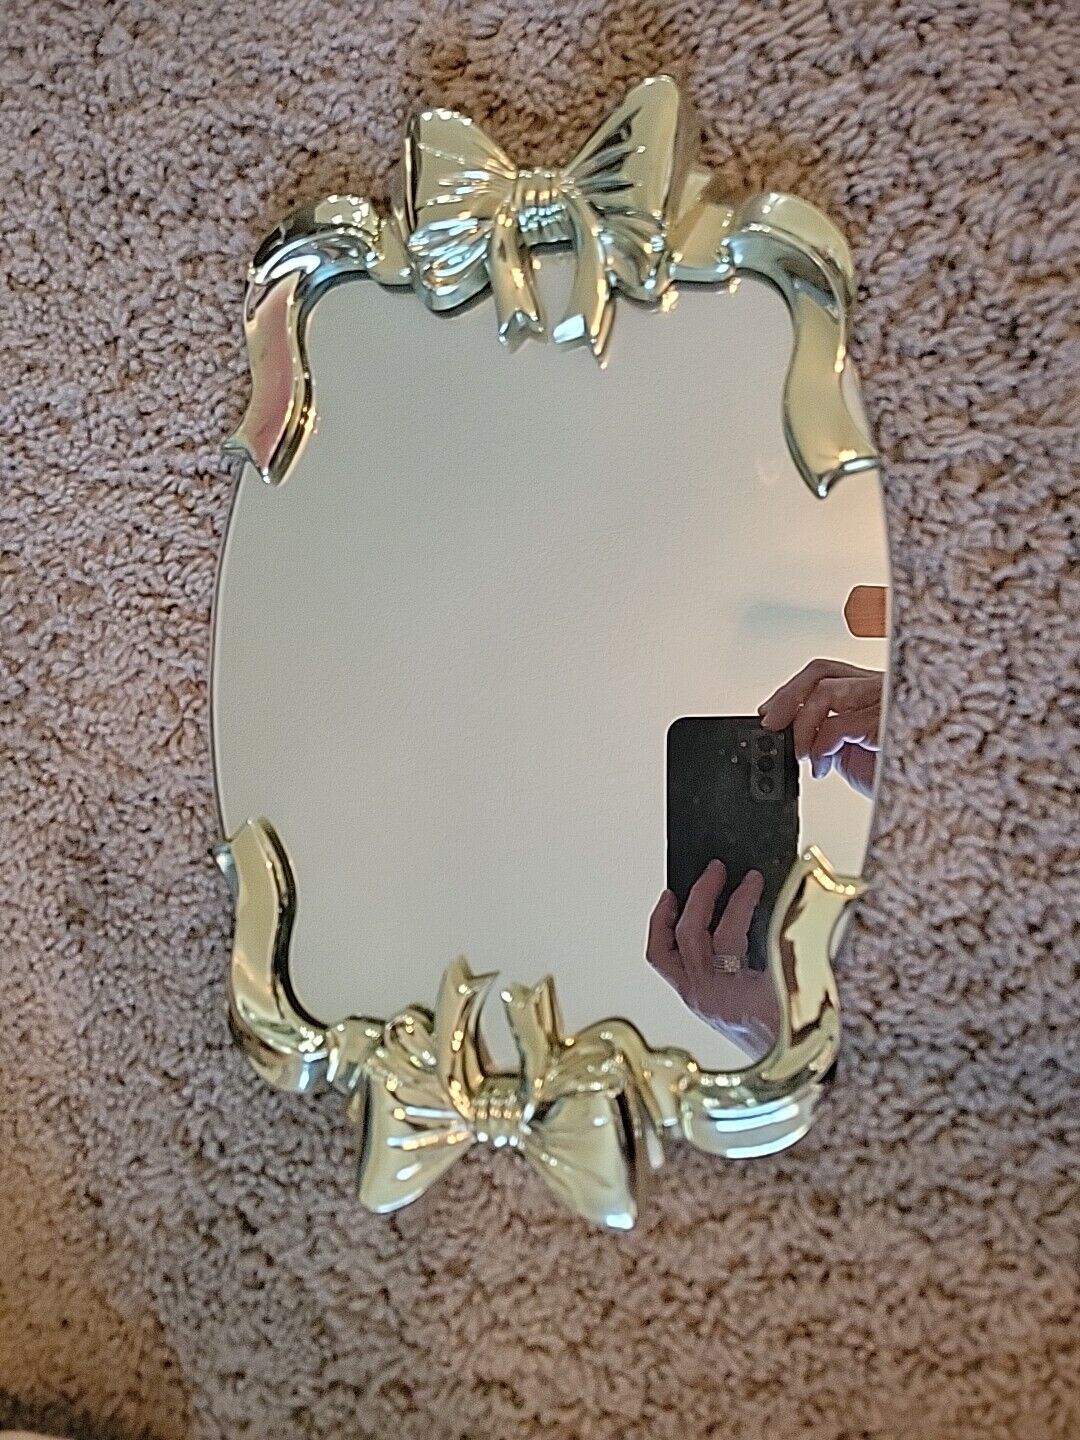 Vintage Vanity Mirror Tray With Gold Bows